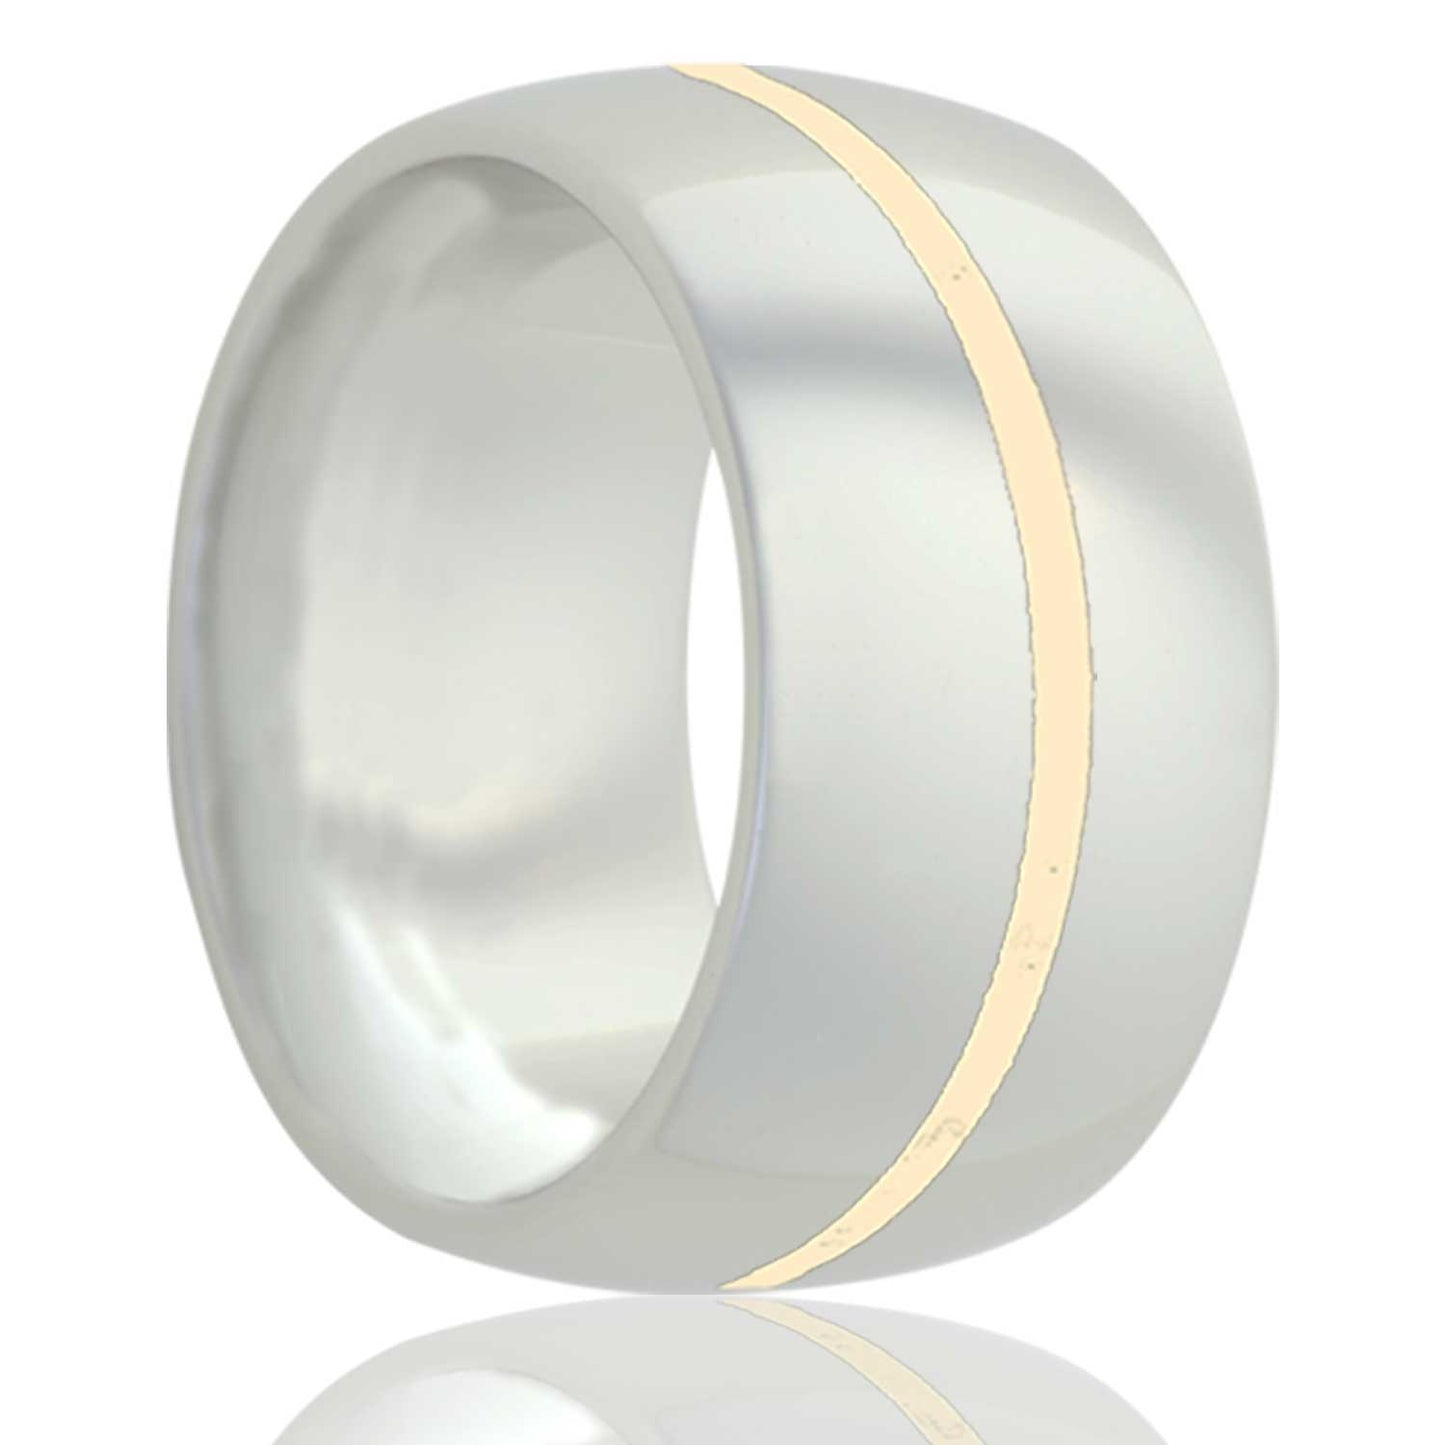 A domed white ceramic men's wedding band displayed on a neutral white background.